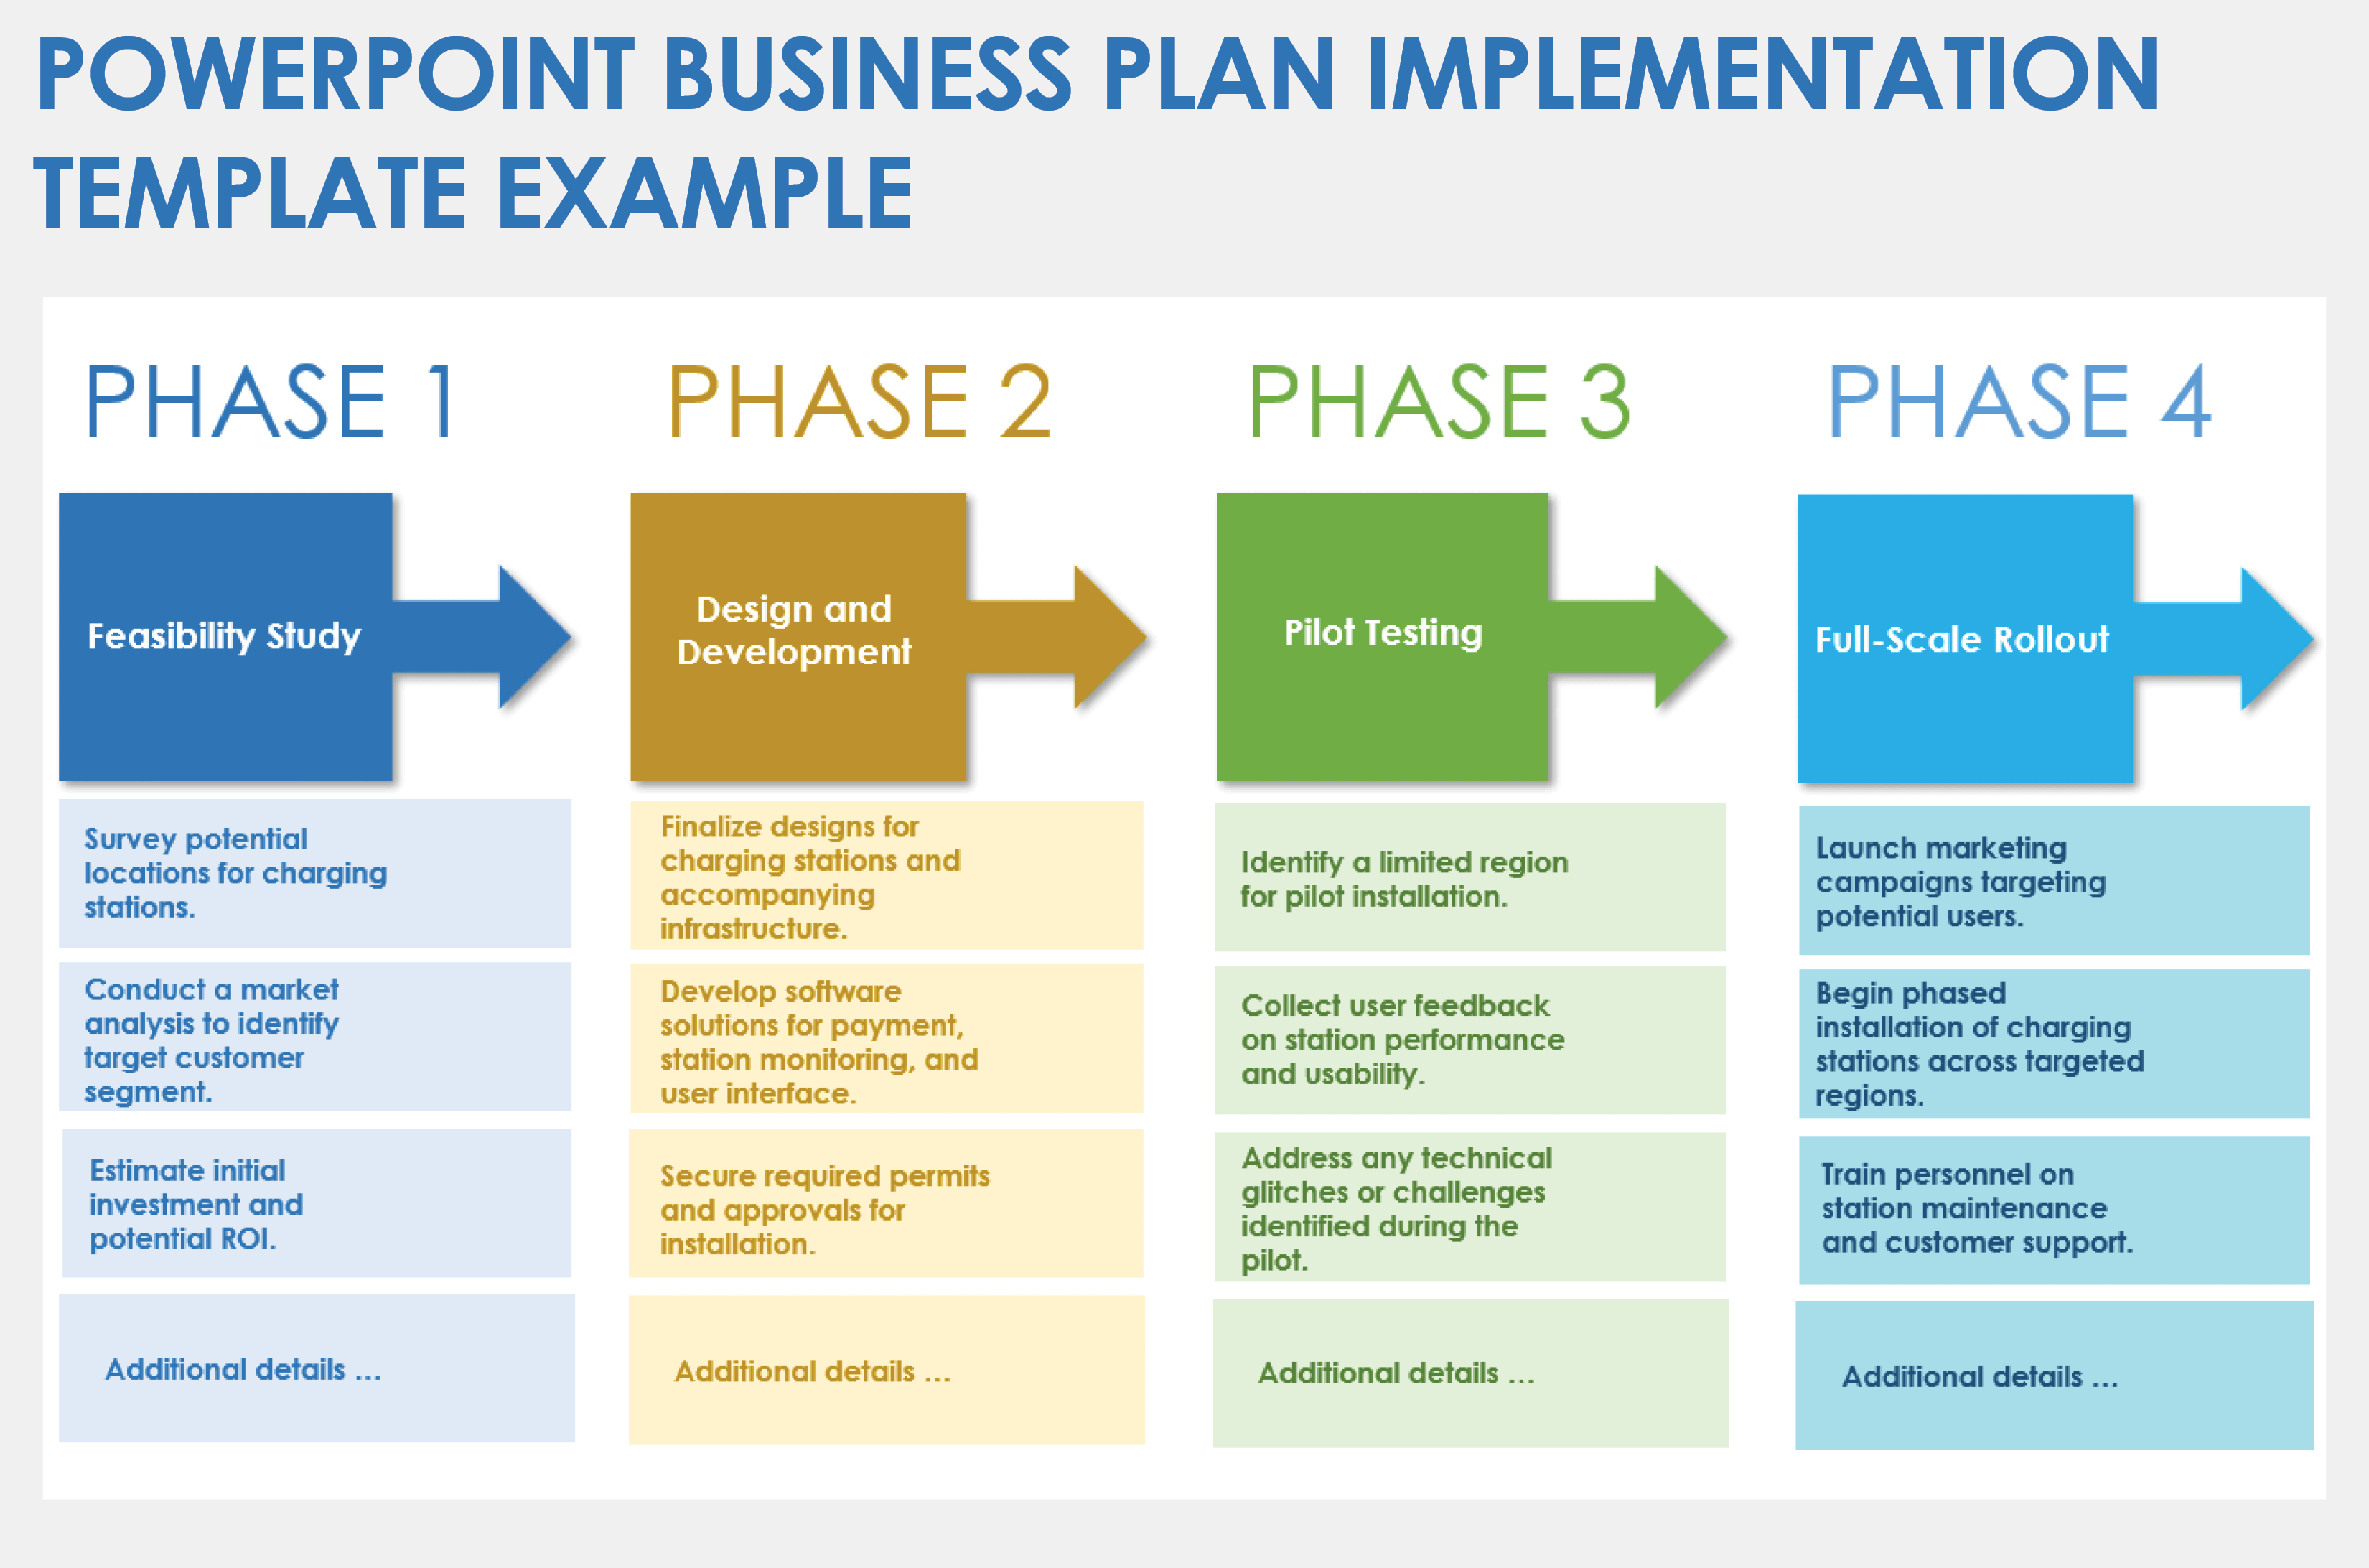 PowerPoint Business Plan Implementation Example Template